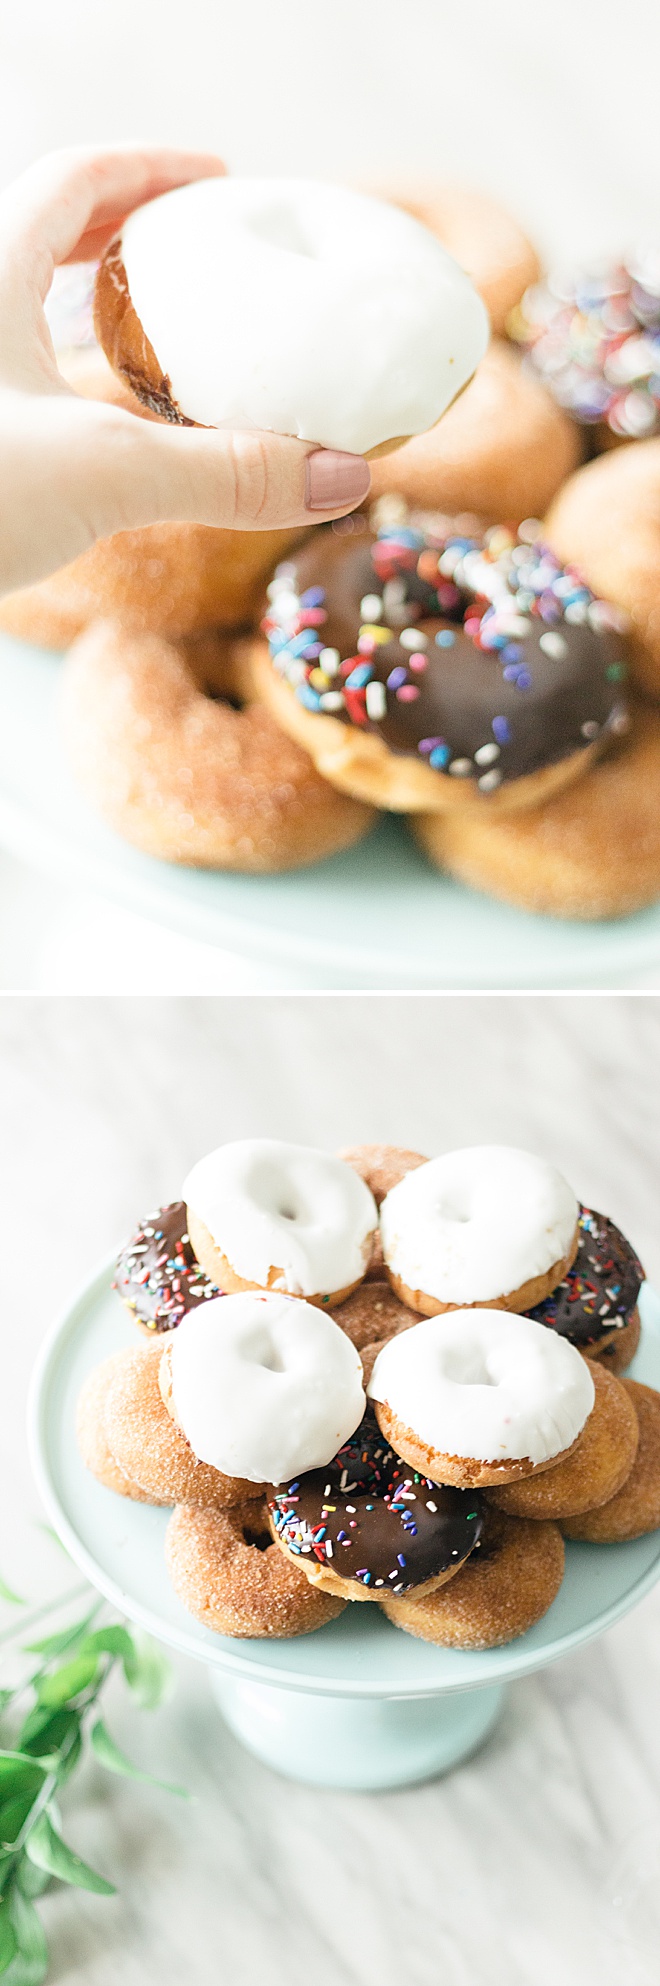 Learn how to make this simple and delicious DIY donut wedding cake!